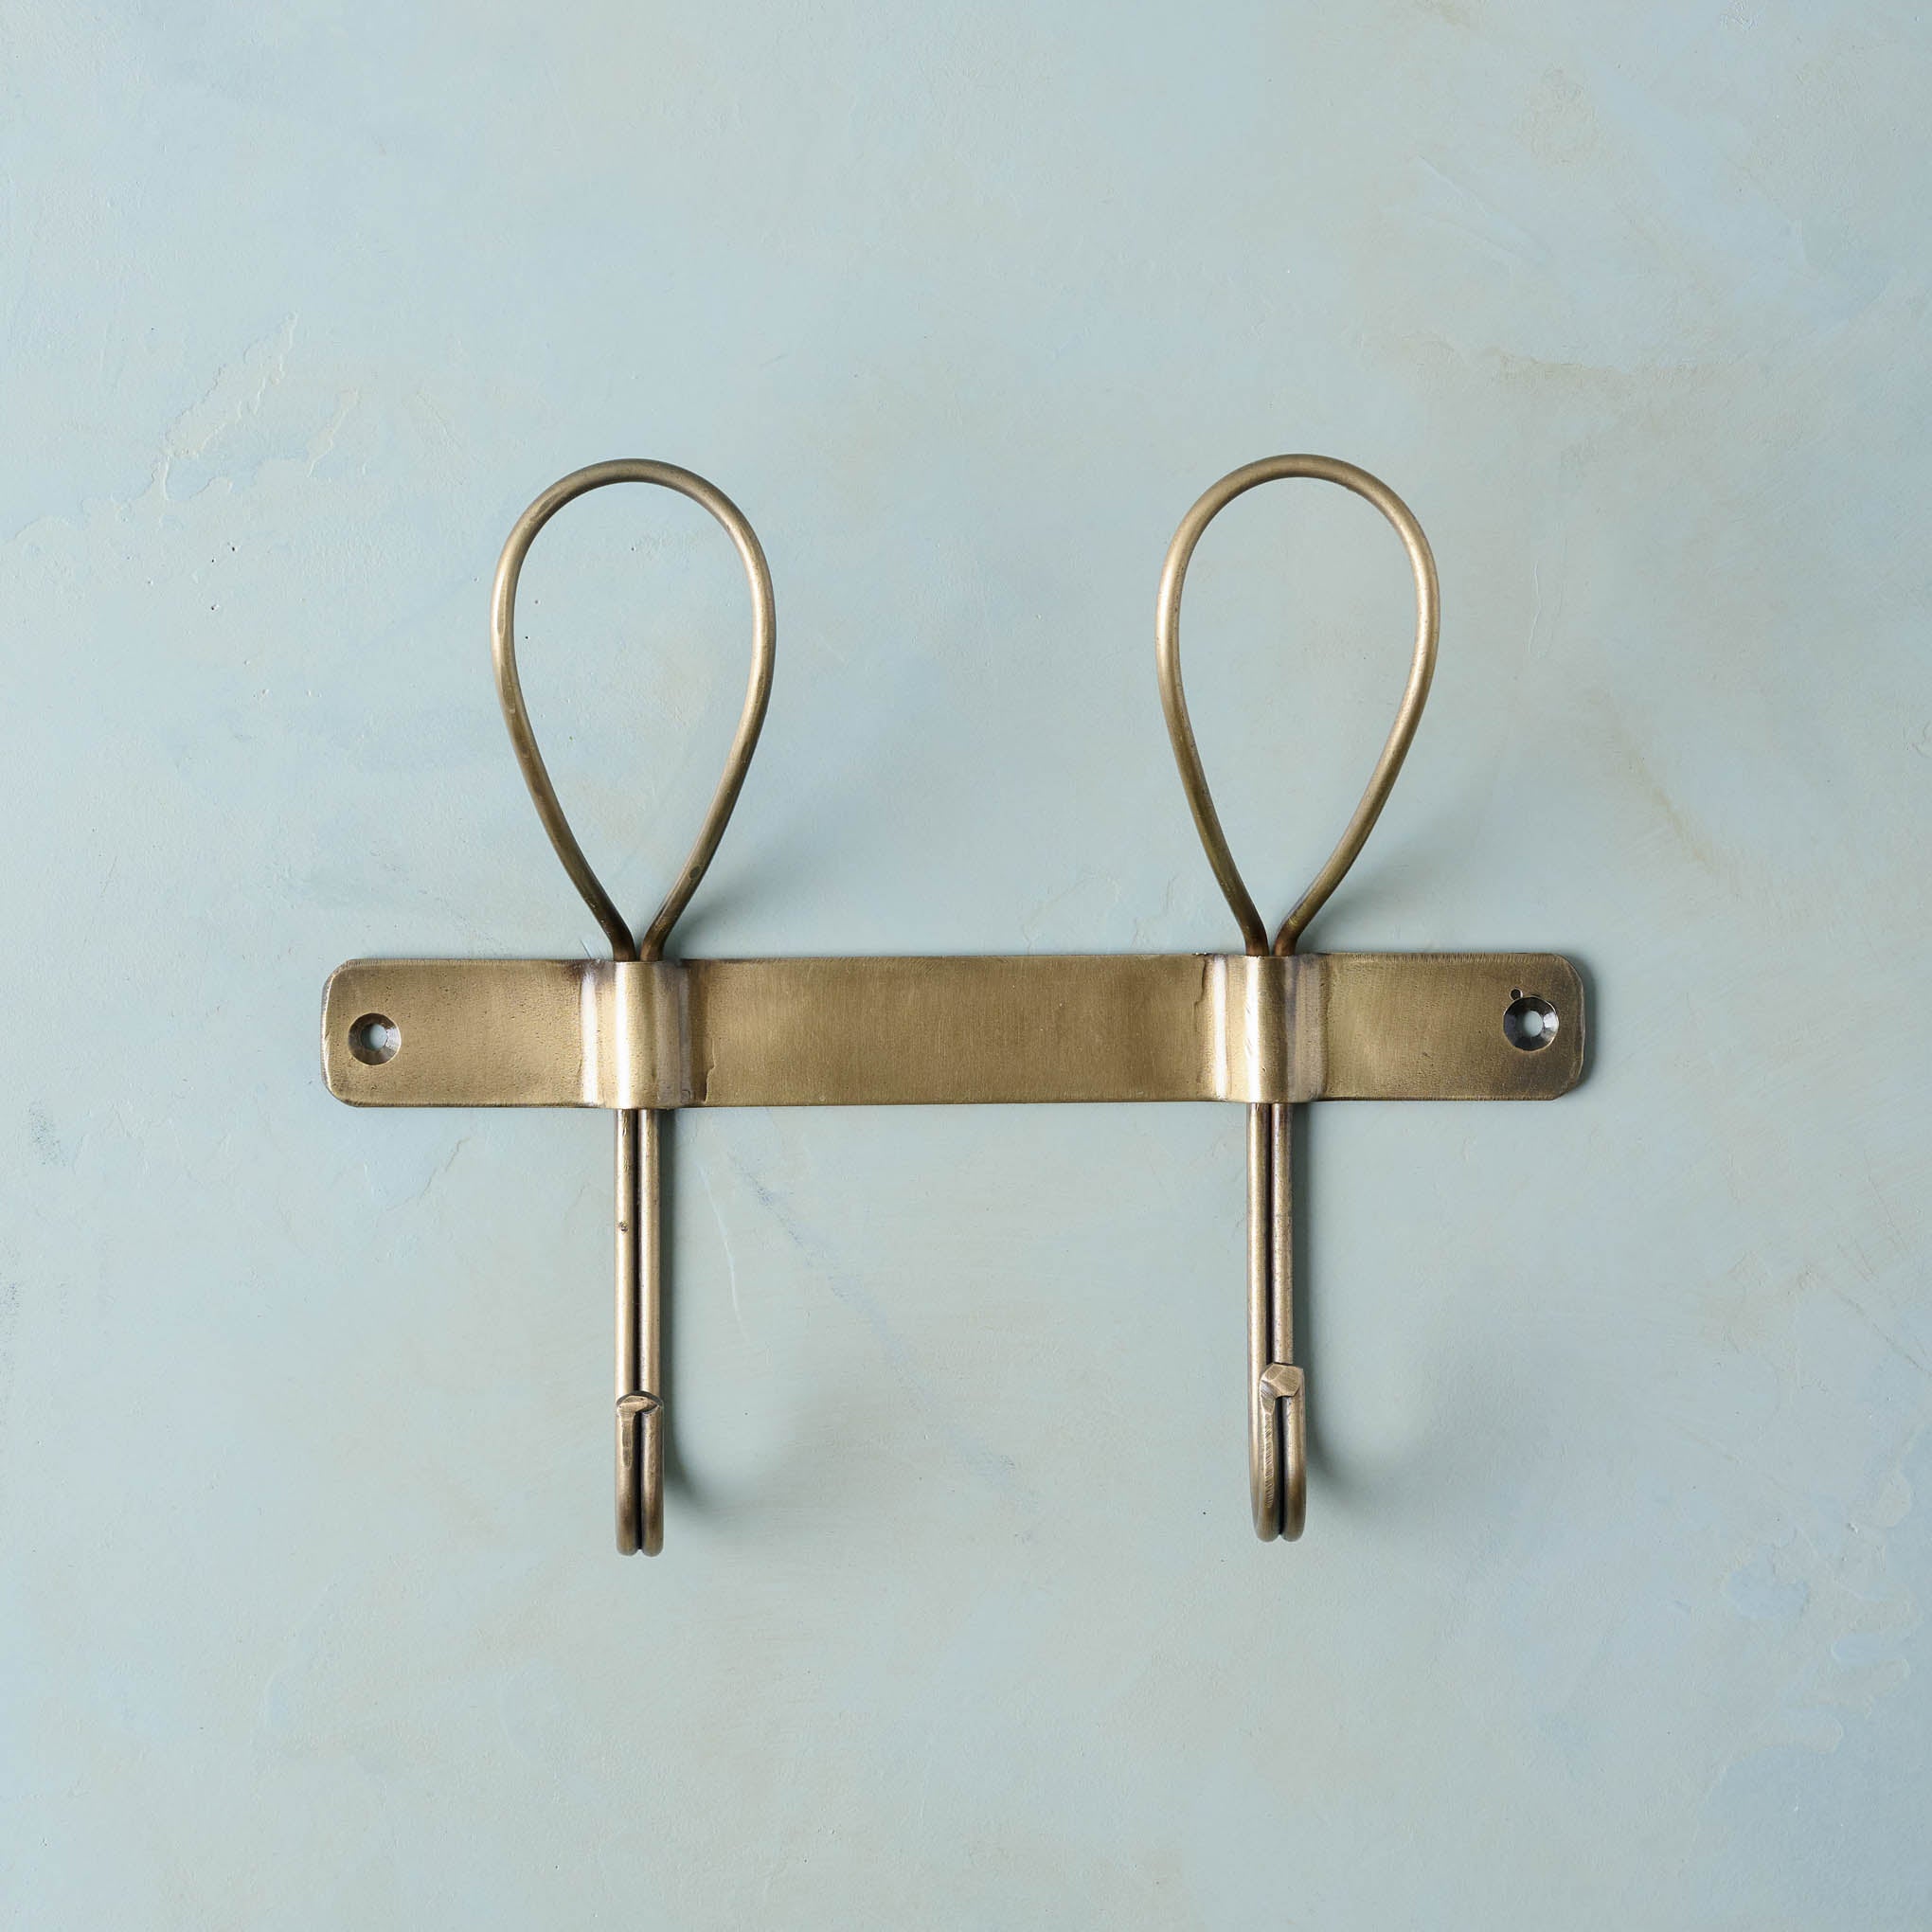 Reed Antiqued Brass Wall Hook - Short On sale for $16.80, discounted from $24.00